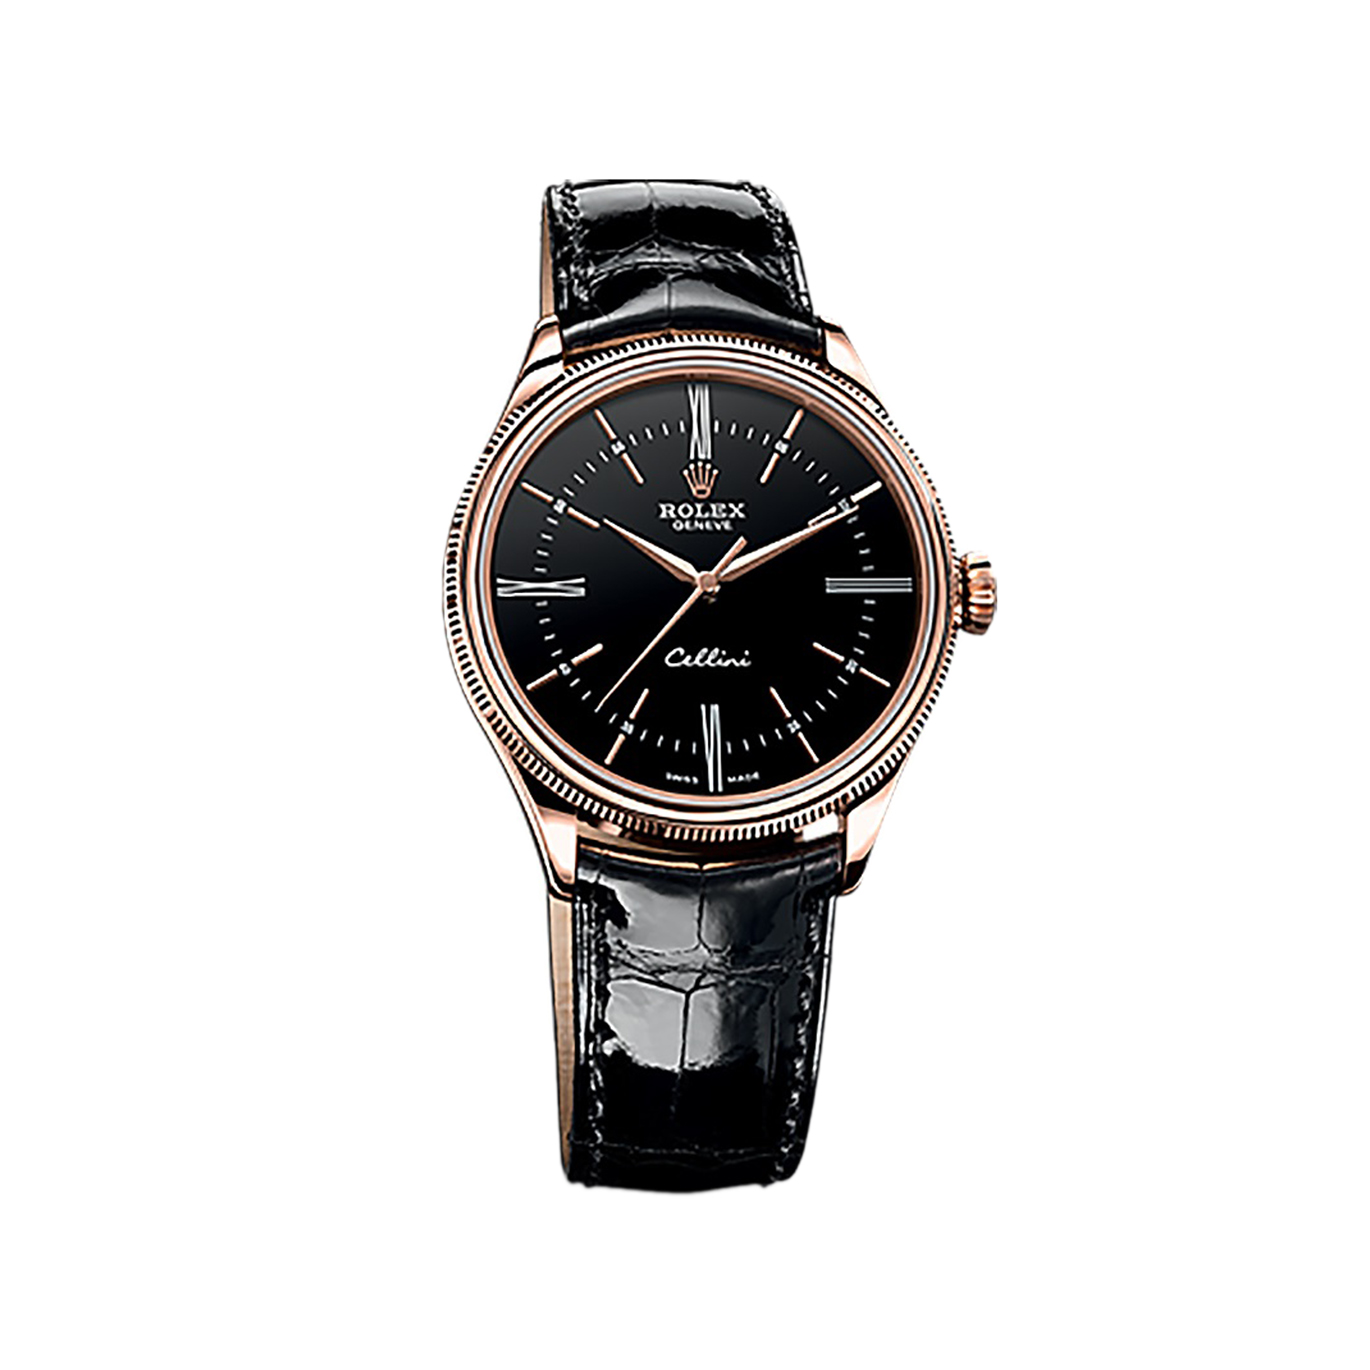 Cellini Time 50505 Rose Gold Watch (Black)